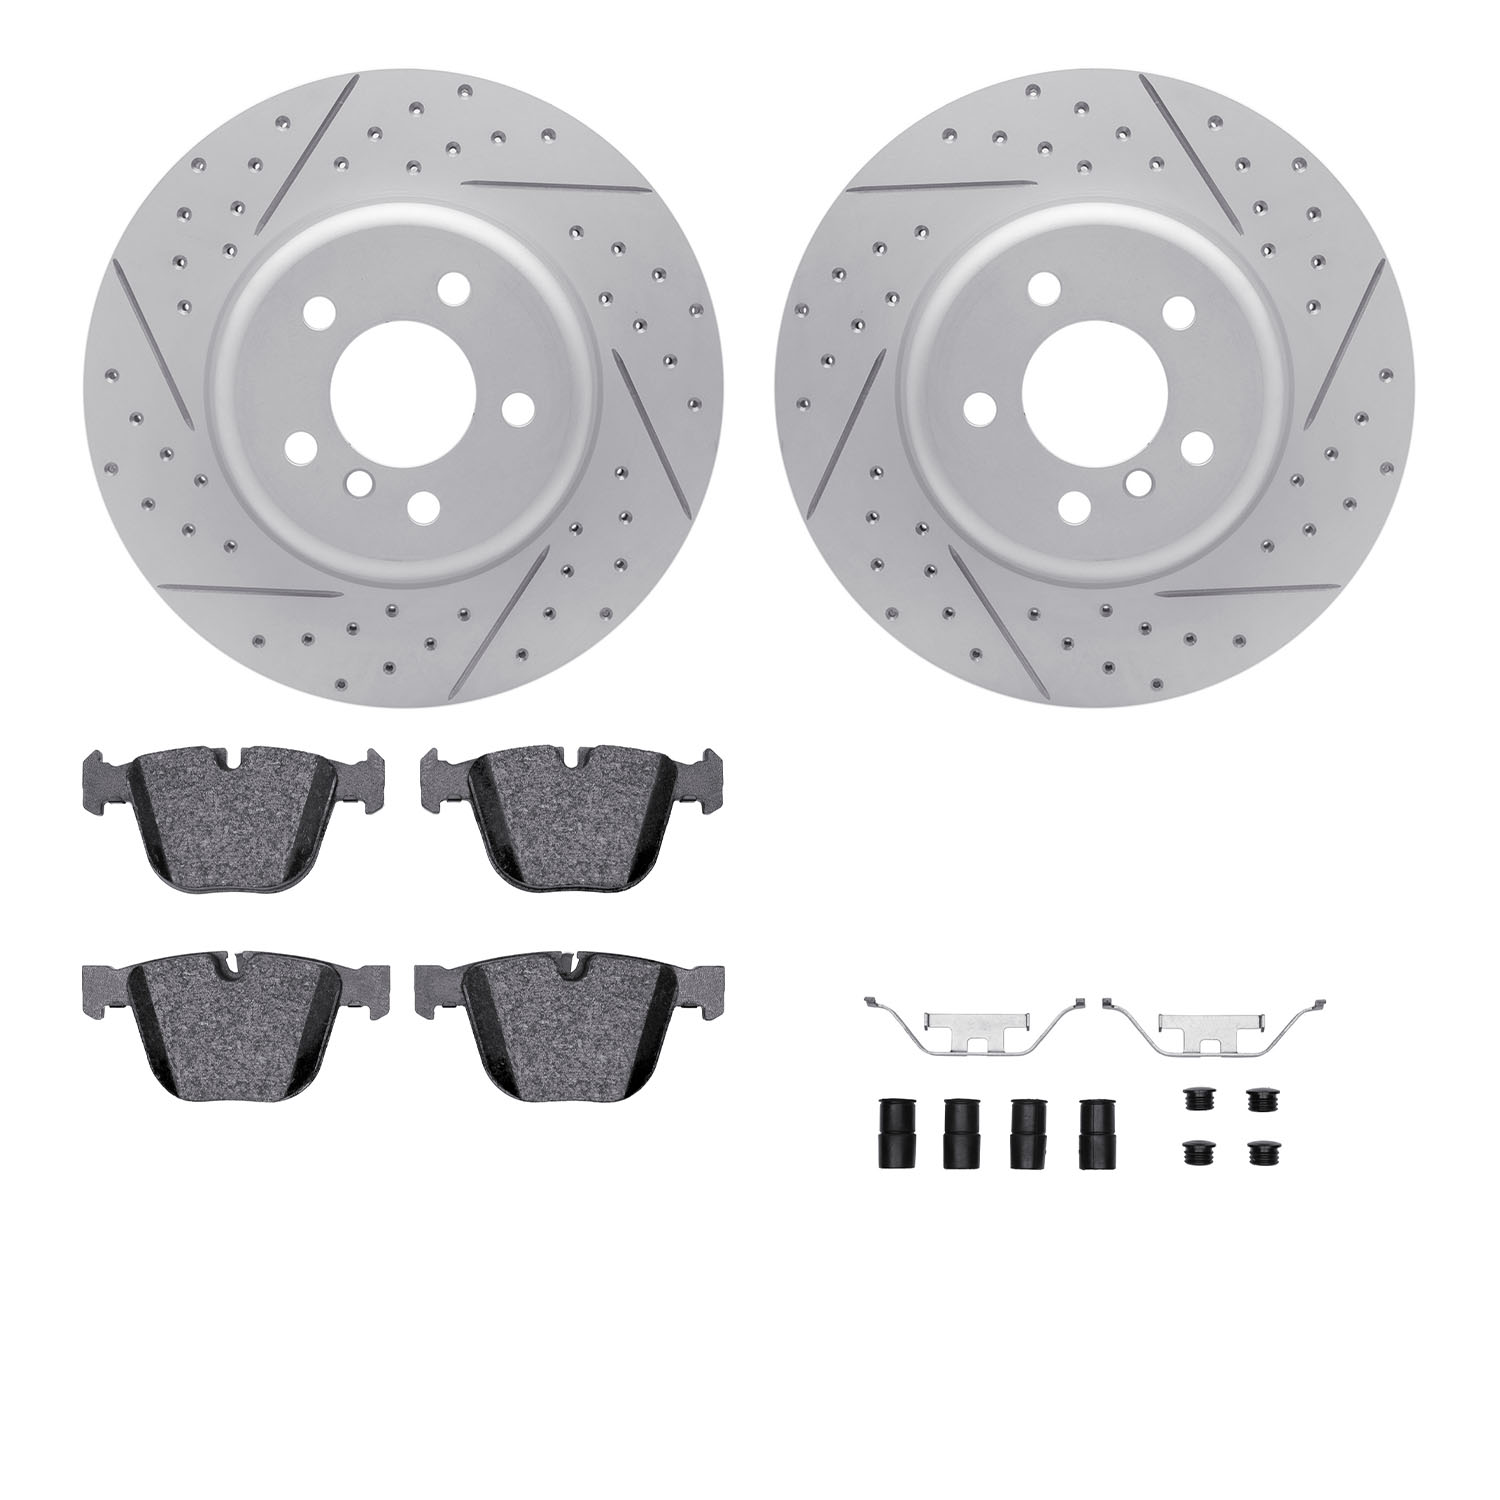 2512-31074 Geoperformance Drilled/Slotted Rotors w/5000 Advanced Brake Pads Kit & Hardware, 2010-2017 BMW, Position: Rear